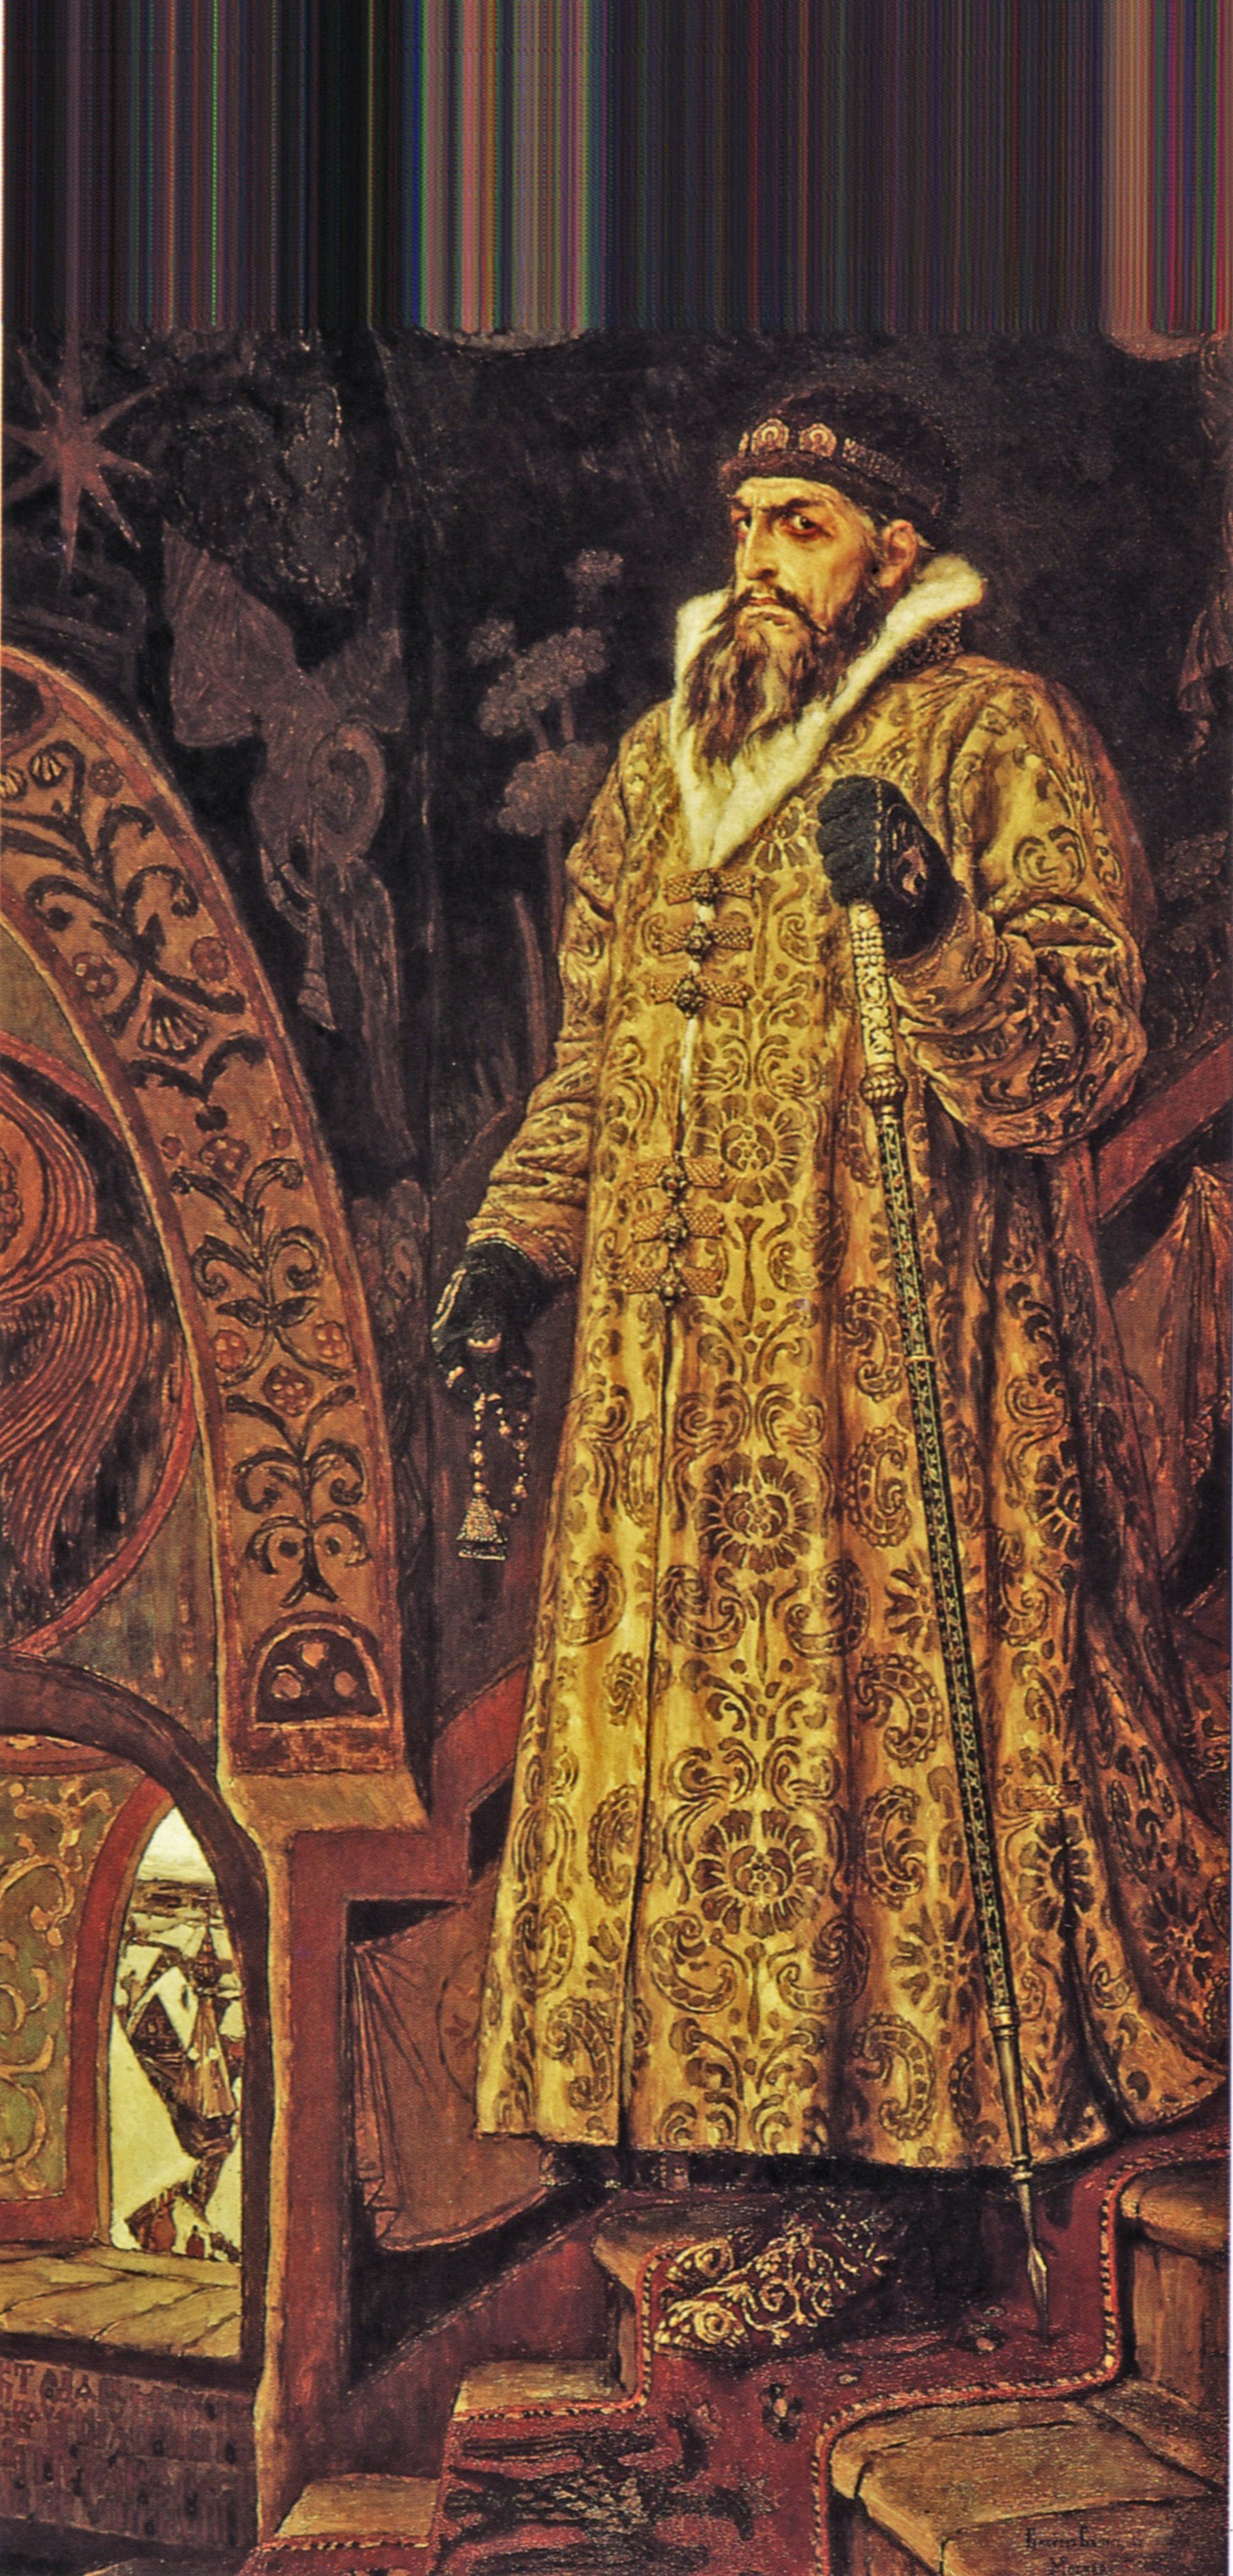 Painting of Tsar Ivan IV the Terrible.